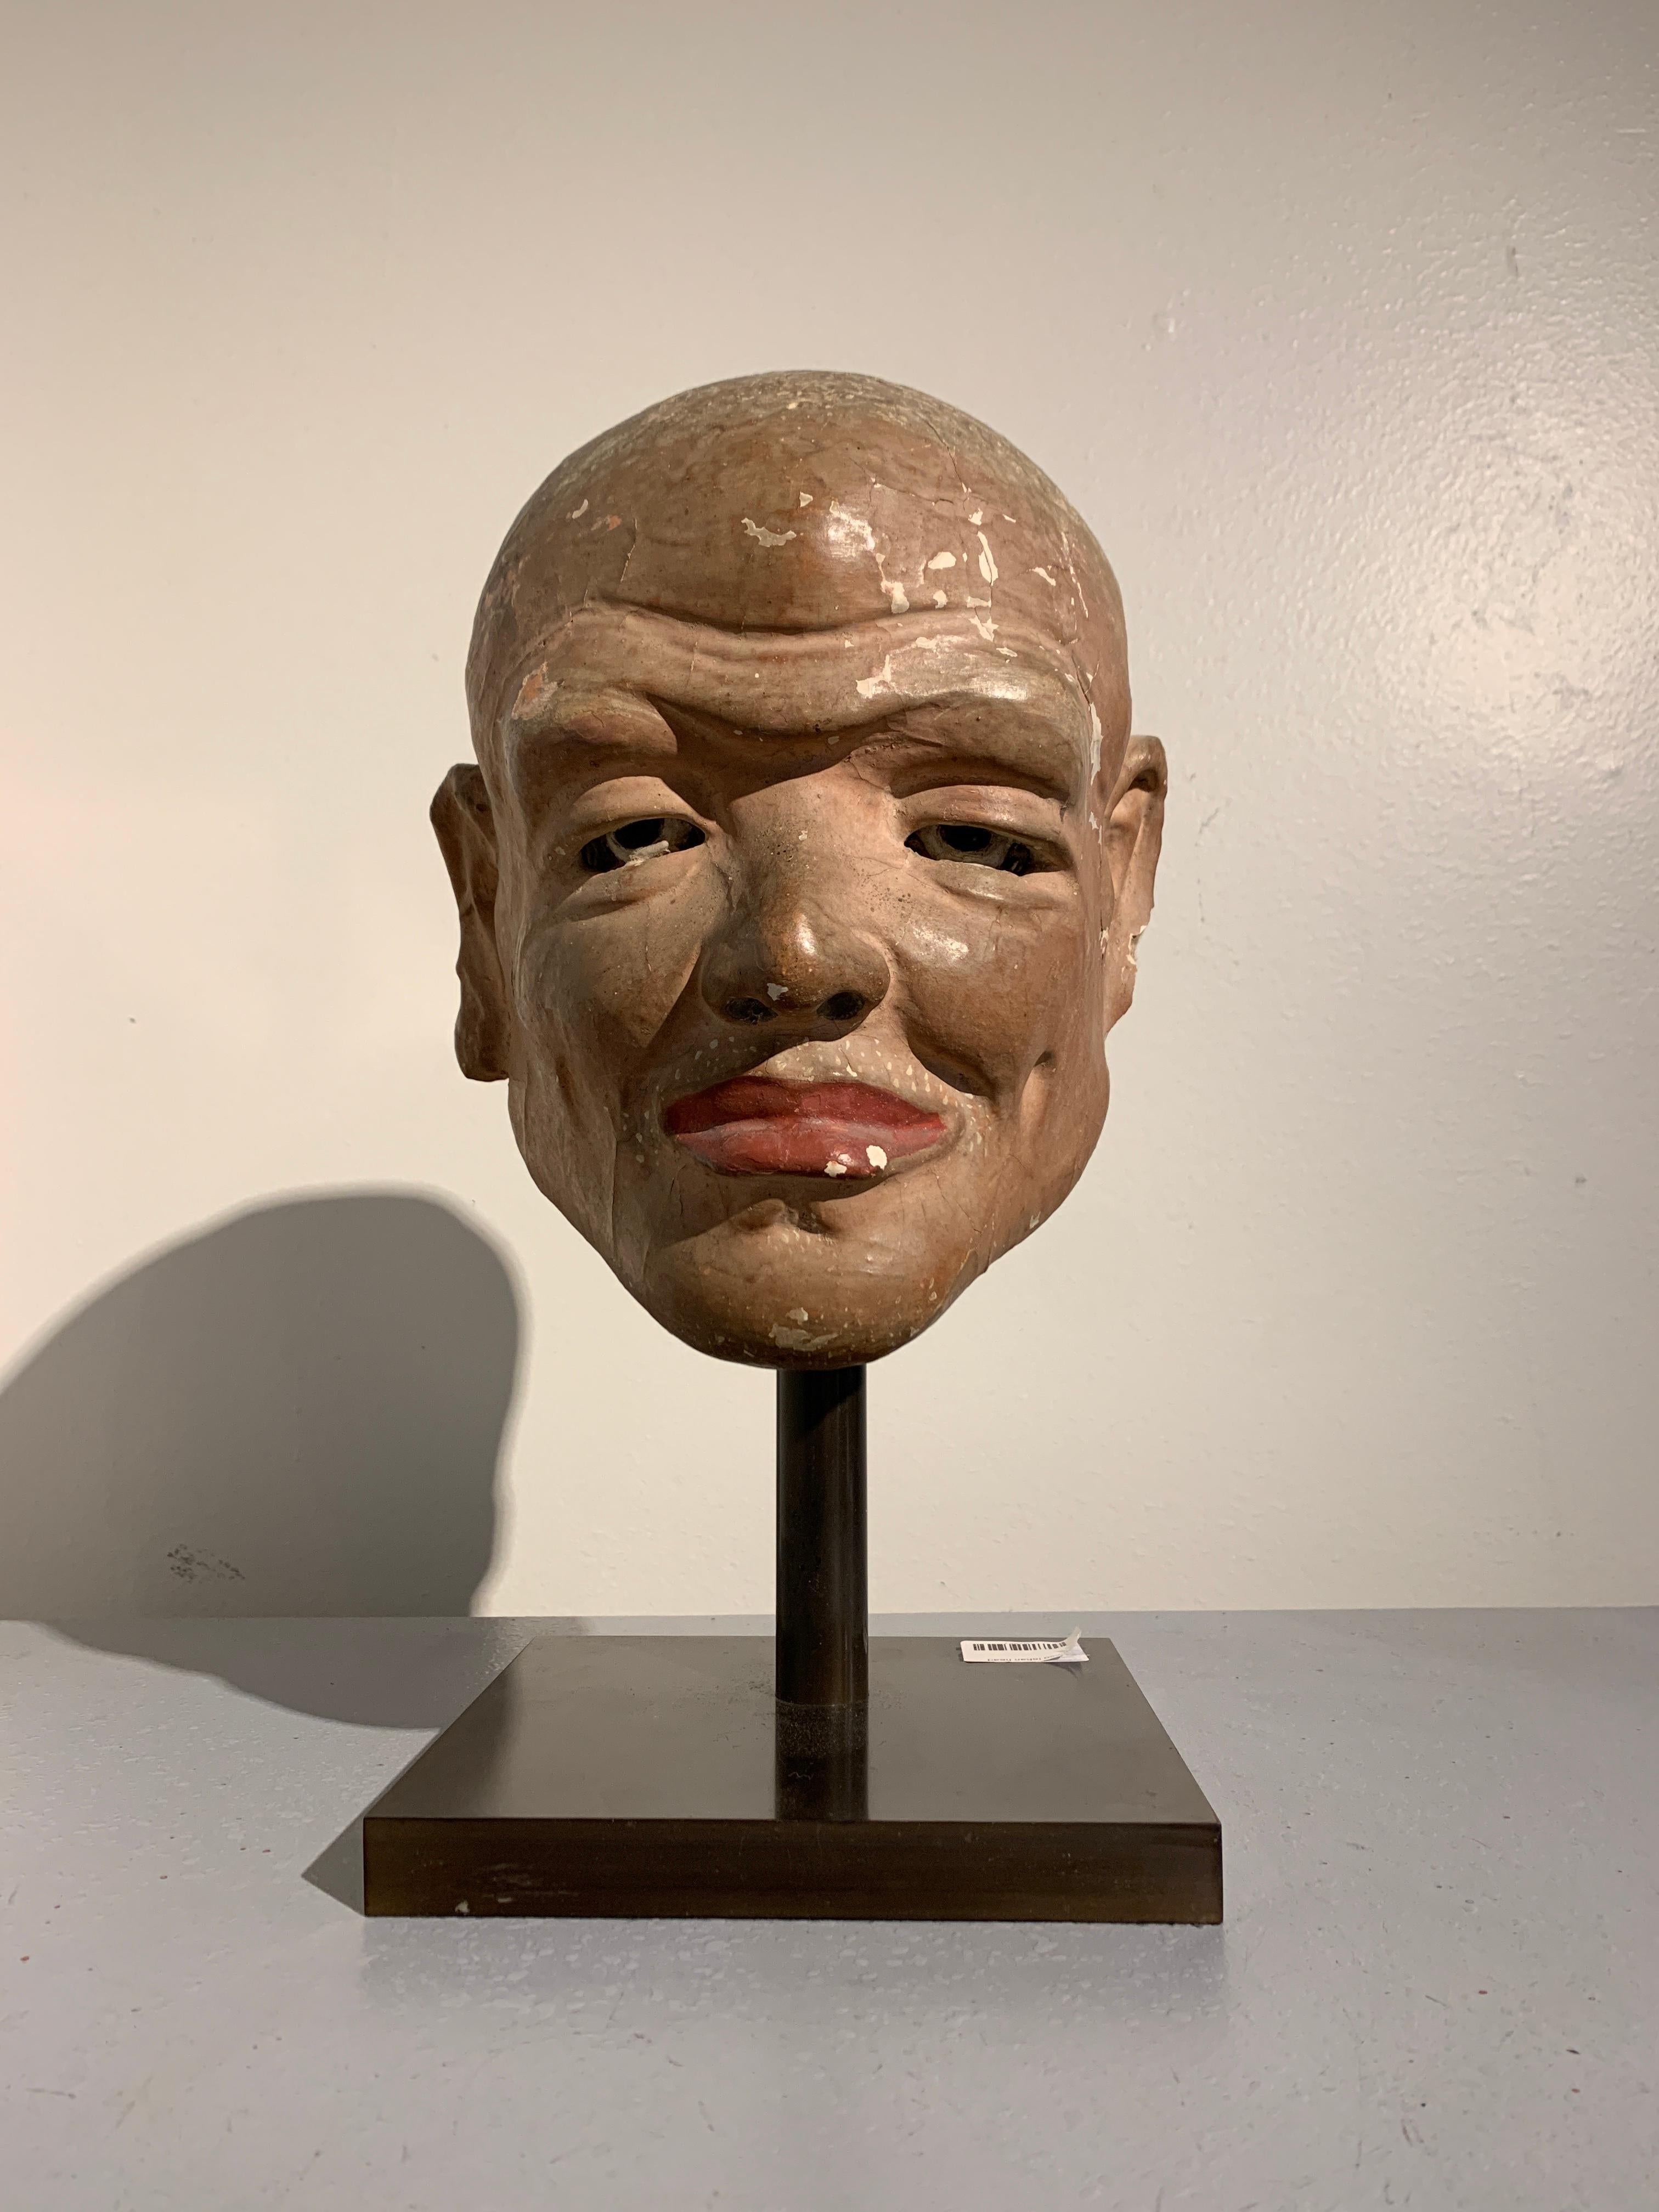 A remarkable Chinese life sized painted stucco head of a luohan, Song, Liao or Jin Dynasty, circa 11th century, China. 

The amazingly life-like figure depicts a luohan (sometime spelled lohan), also known as an arhat, one of the original disciples